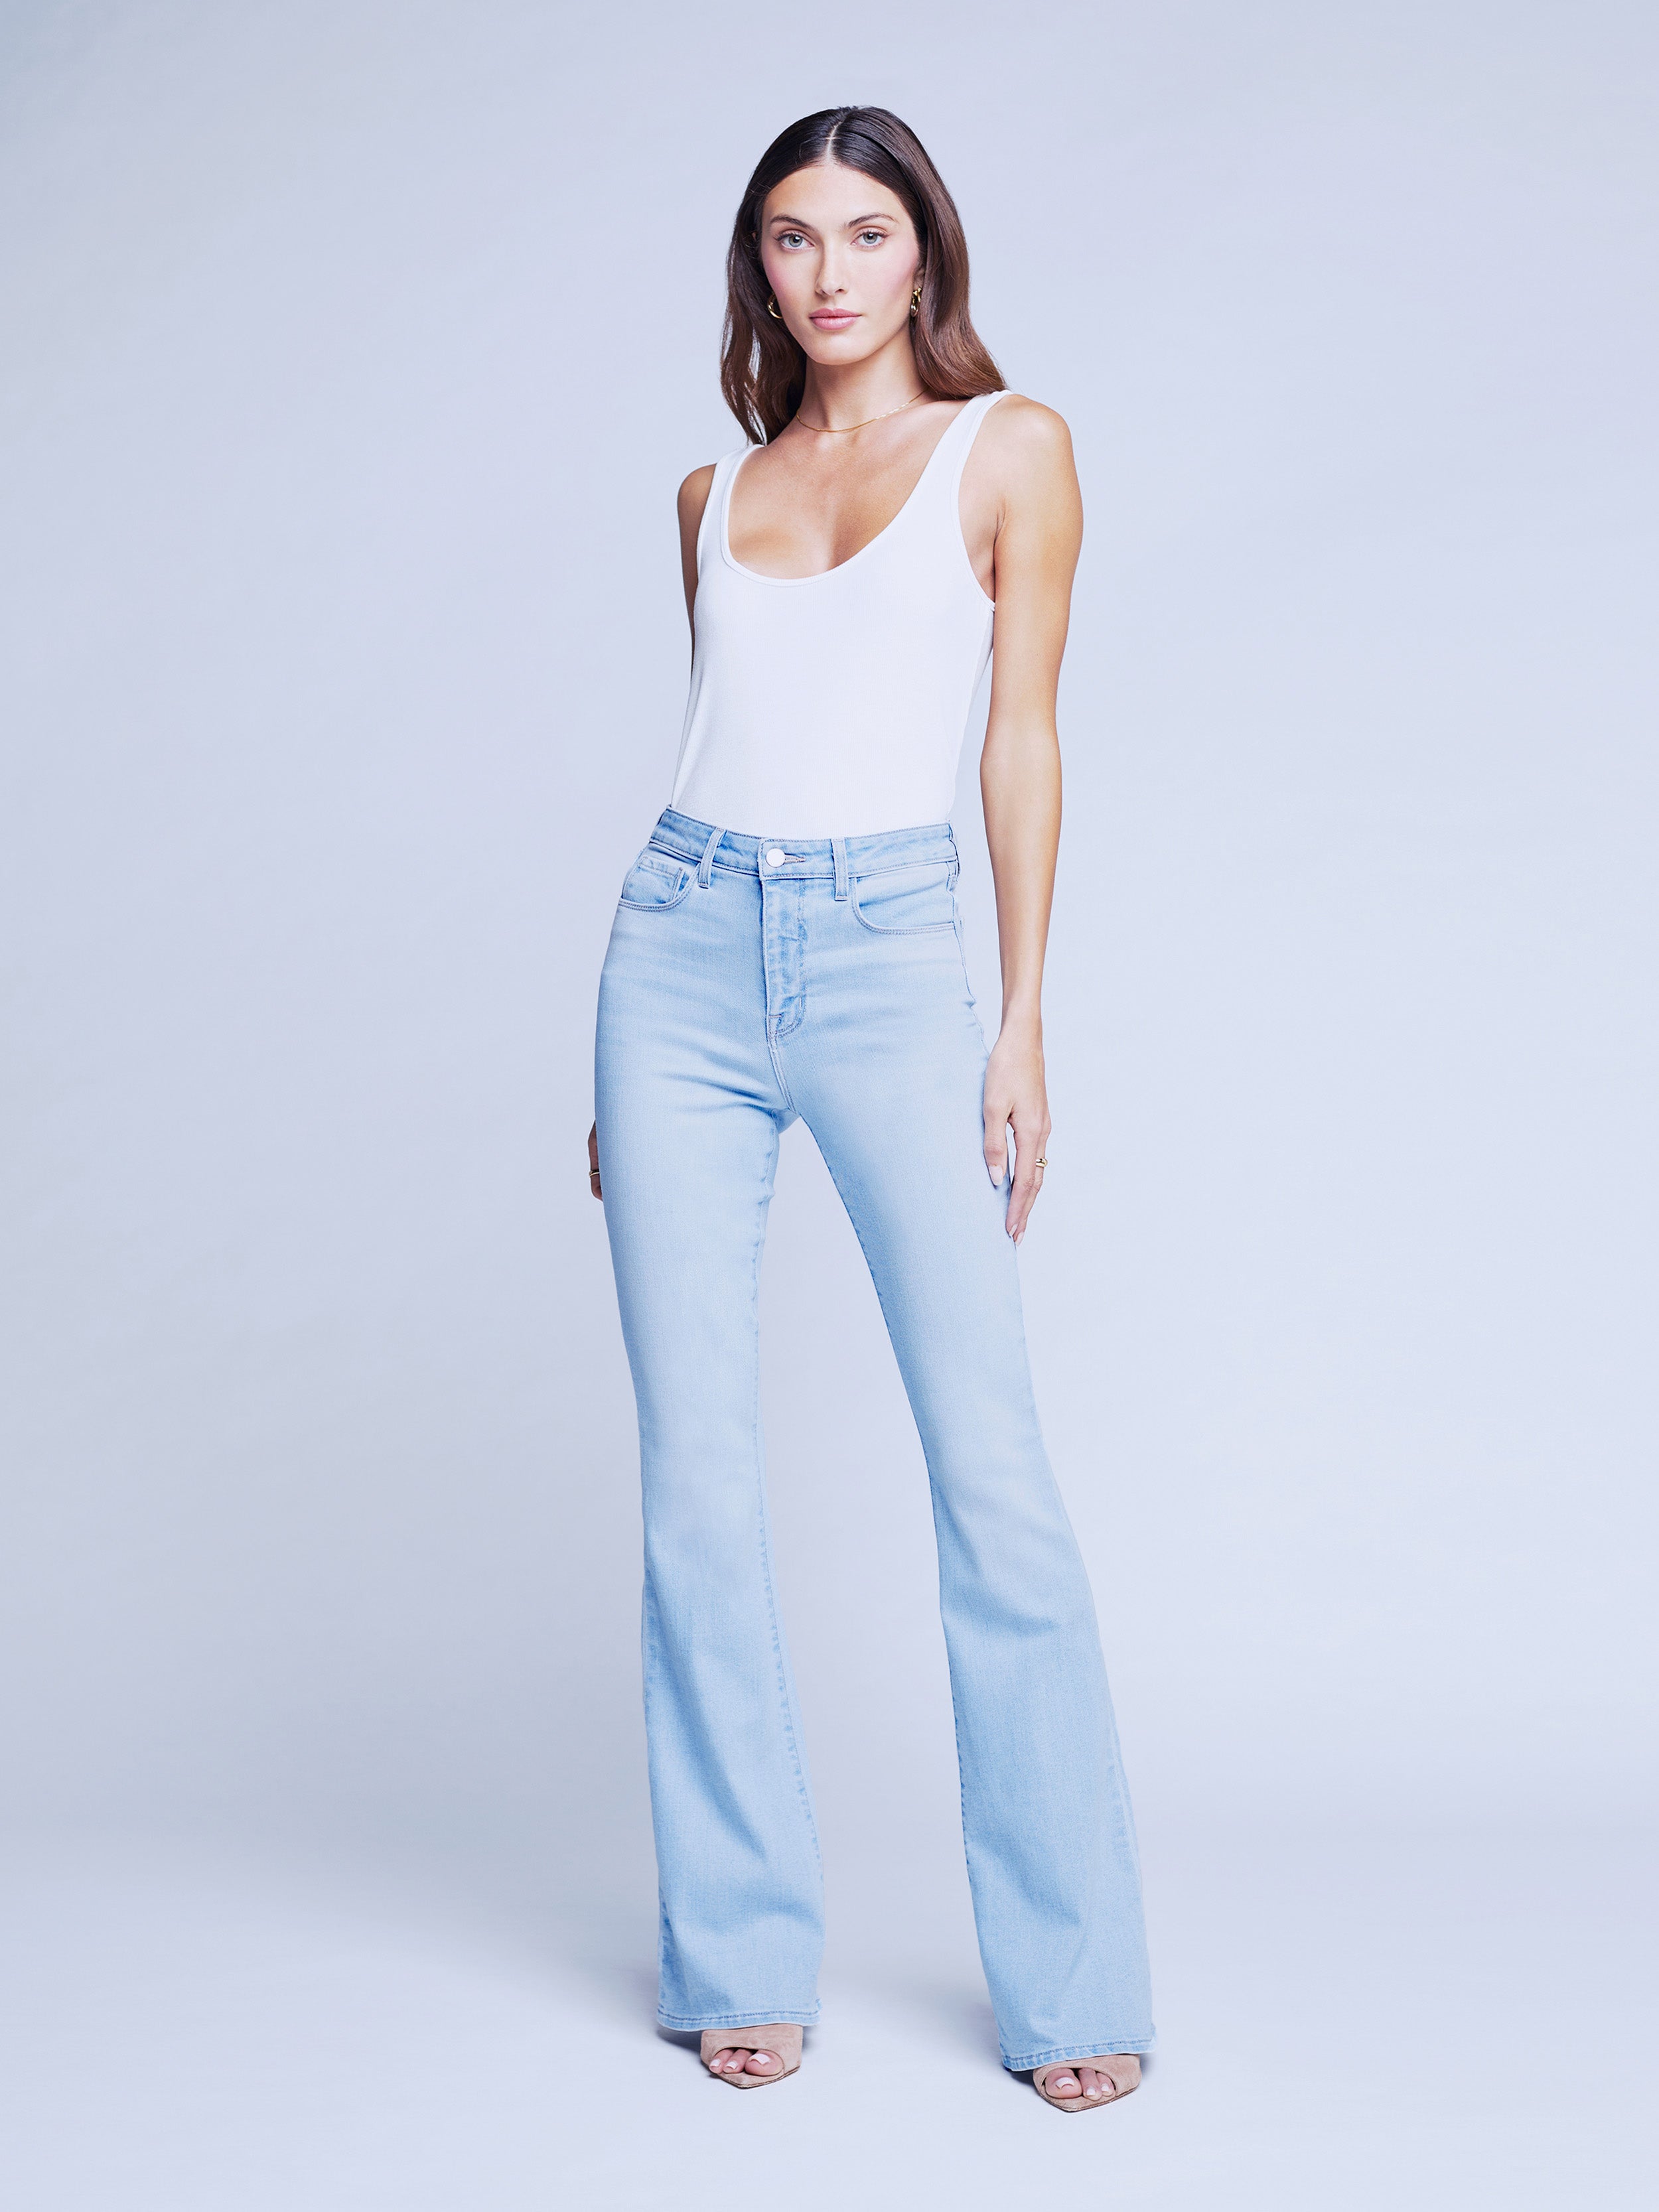 Womens Jeans High Waisted Stretch Flare Light Blue Wash Denim Jeans Pants  for Women Gift for Women -  Israel